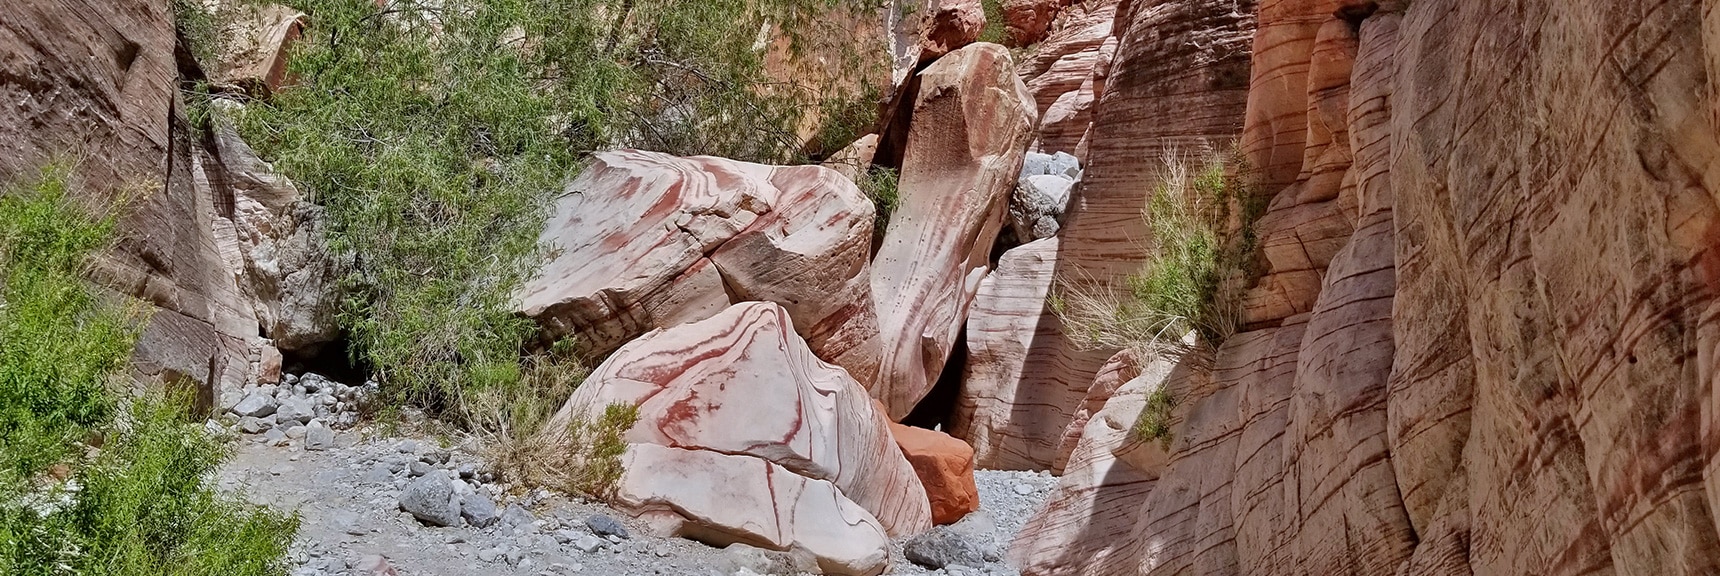 Weaving Around Obstacles in Gateway Canyon. Beautiful Rock Formations | Kraft Mountain Loop | Calico Basin, Nevada